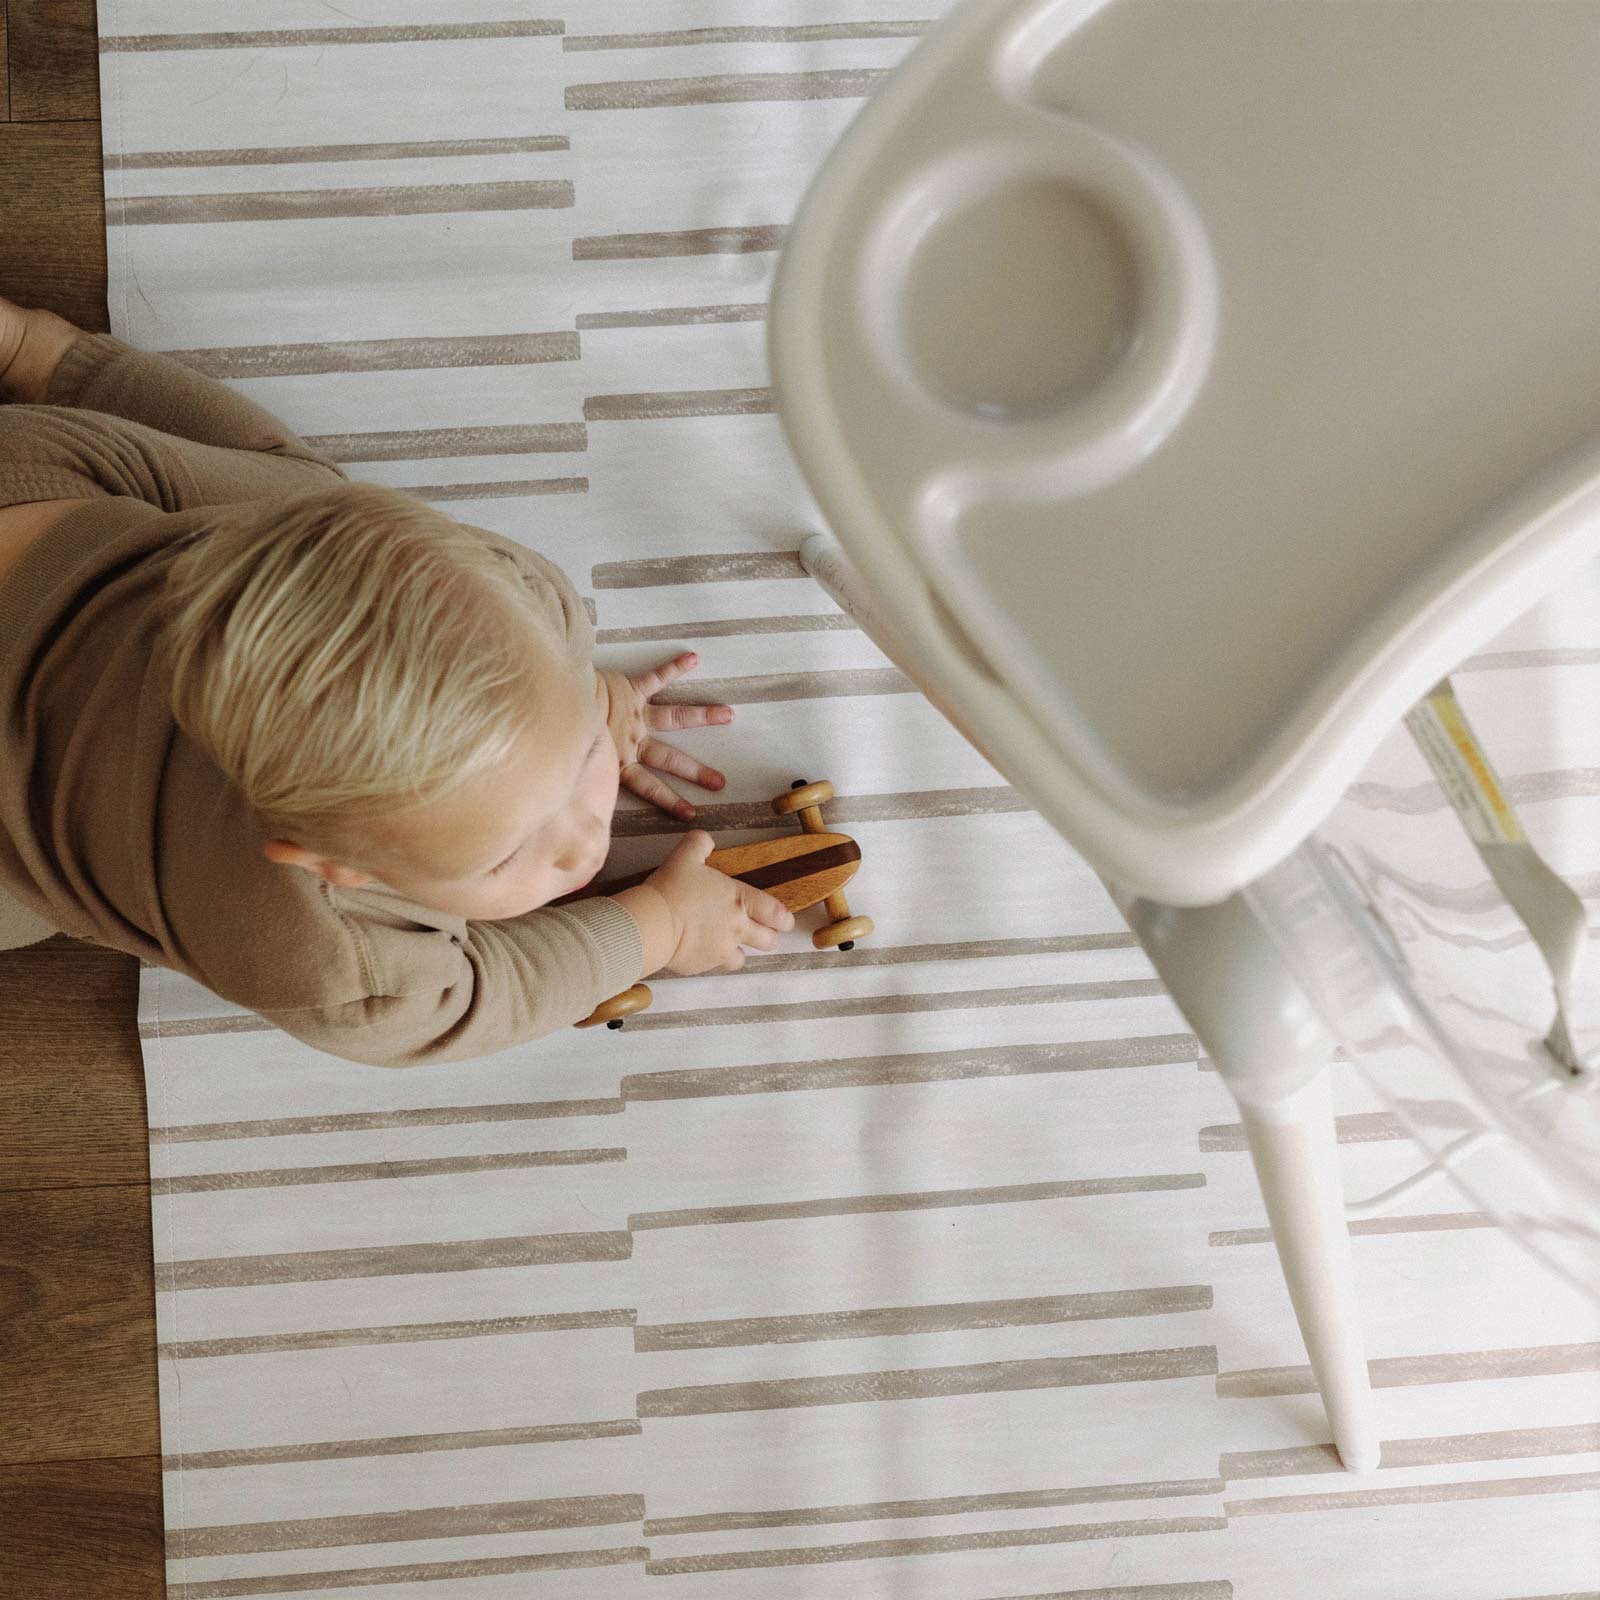 Nara Natural highchair mat shown from above with high chair mat and baby boy crawling across with wooden toy in his hand